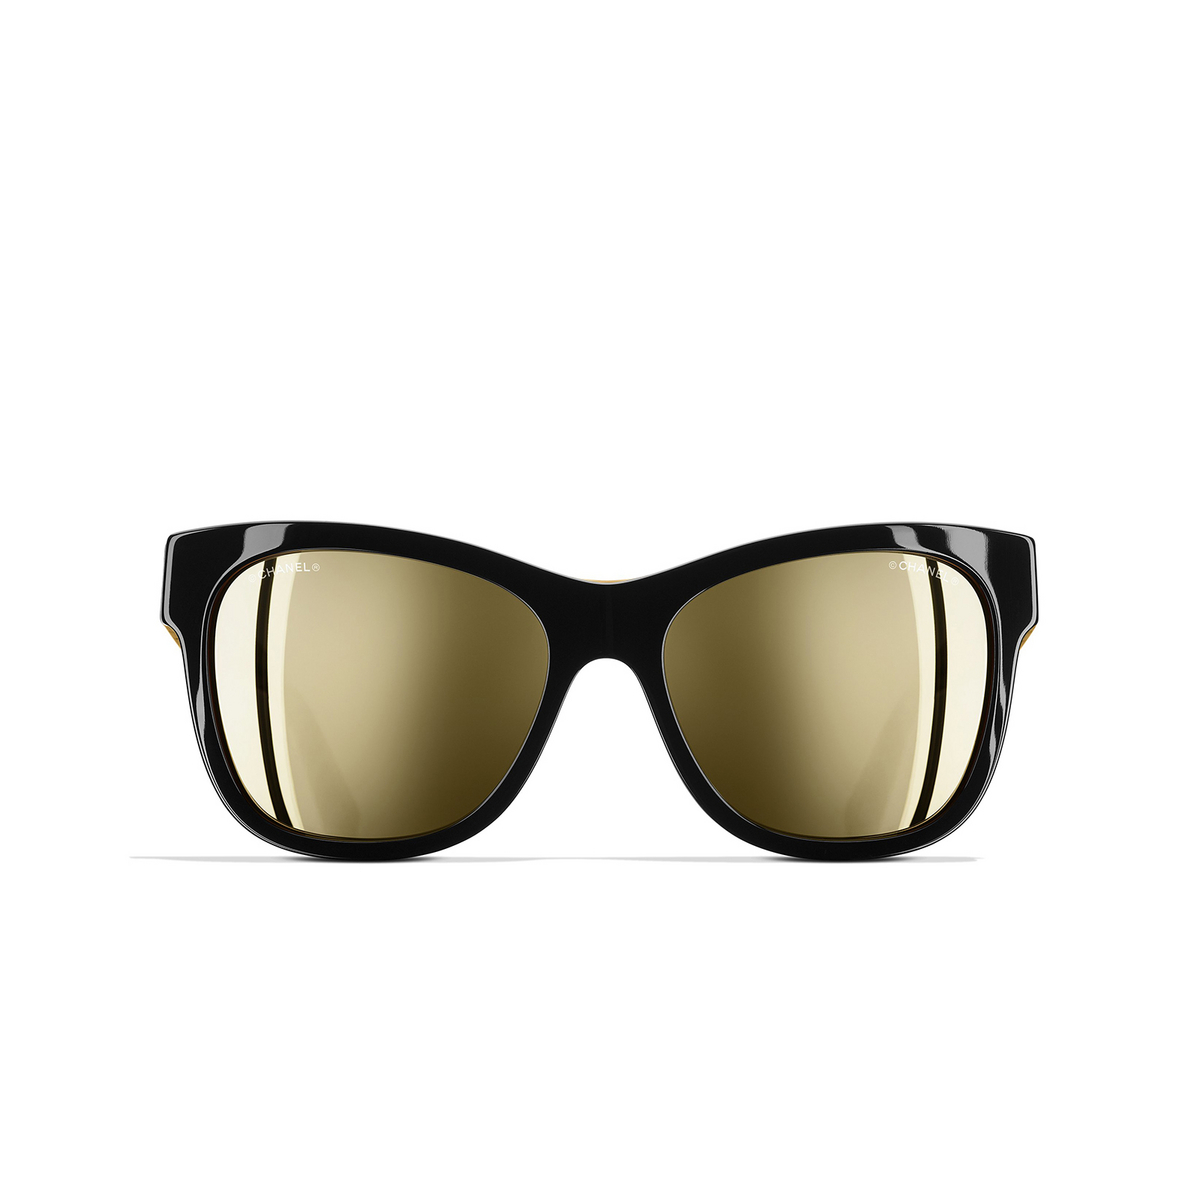 CHANEL square Sunglasses 1609/5A Black & Gold - front view